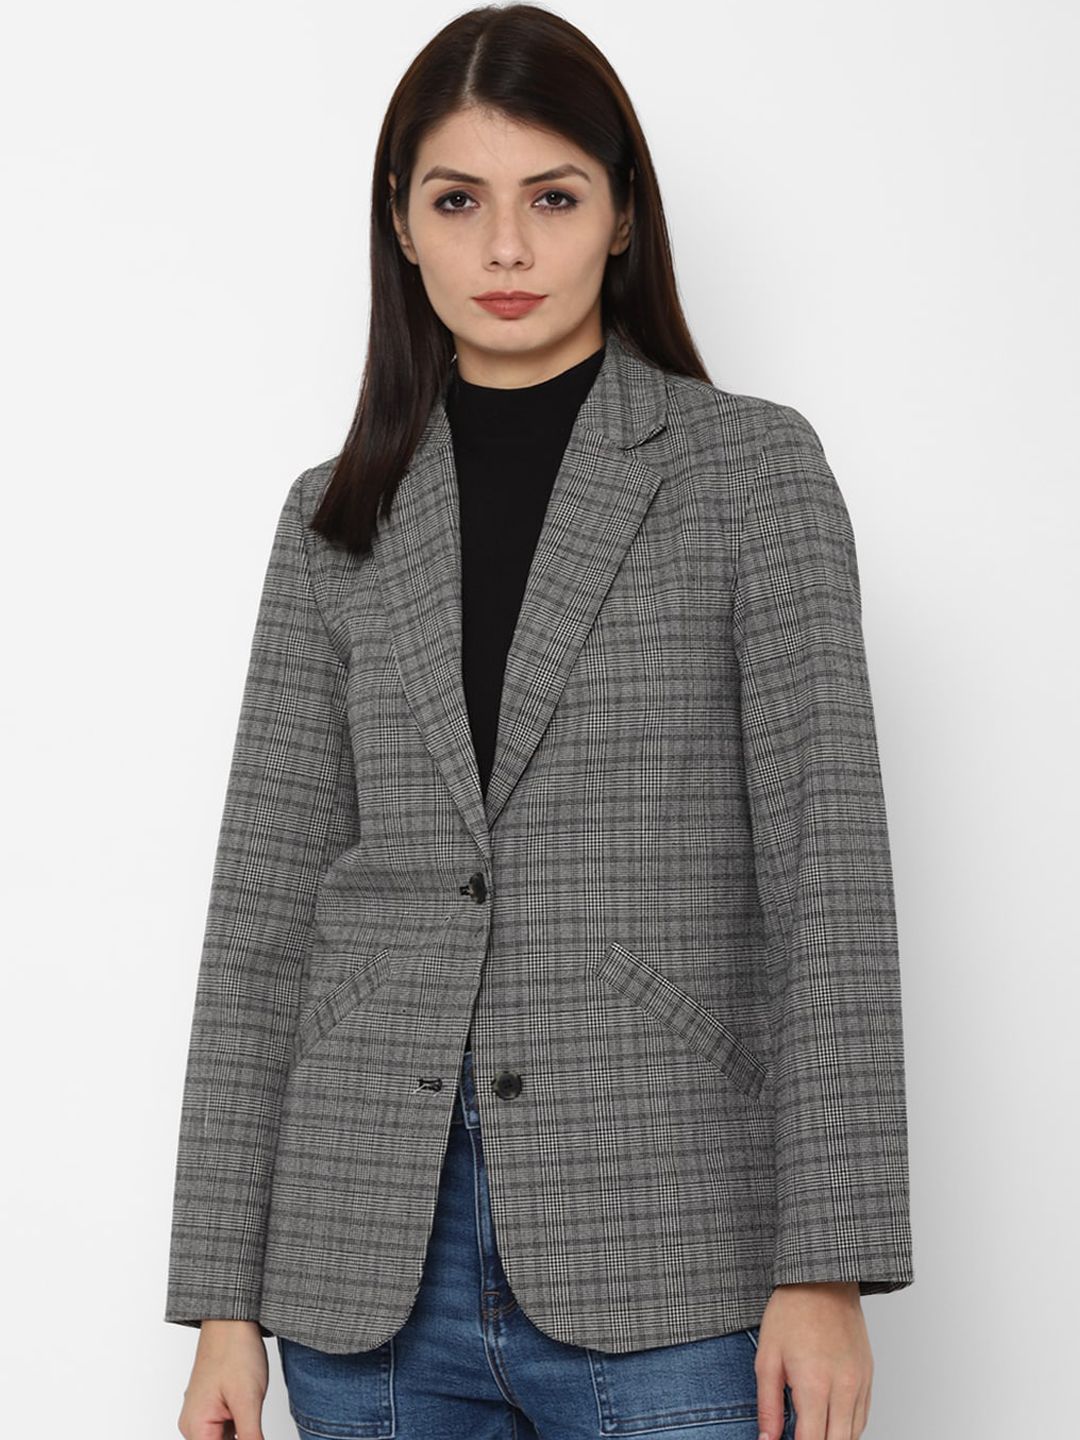 AMERICAN EAGLE OUTFITTERS Women Grey & Black Checked Tailored Jacket Price in India